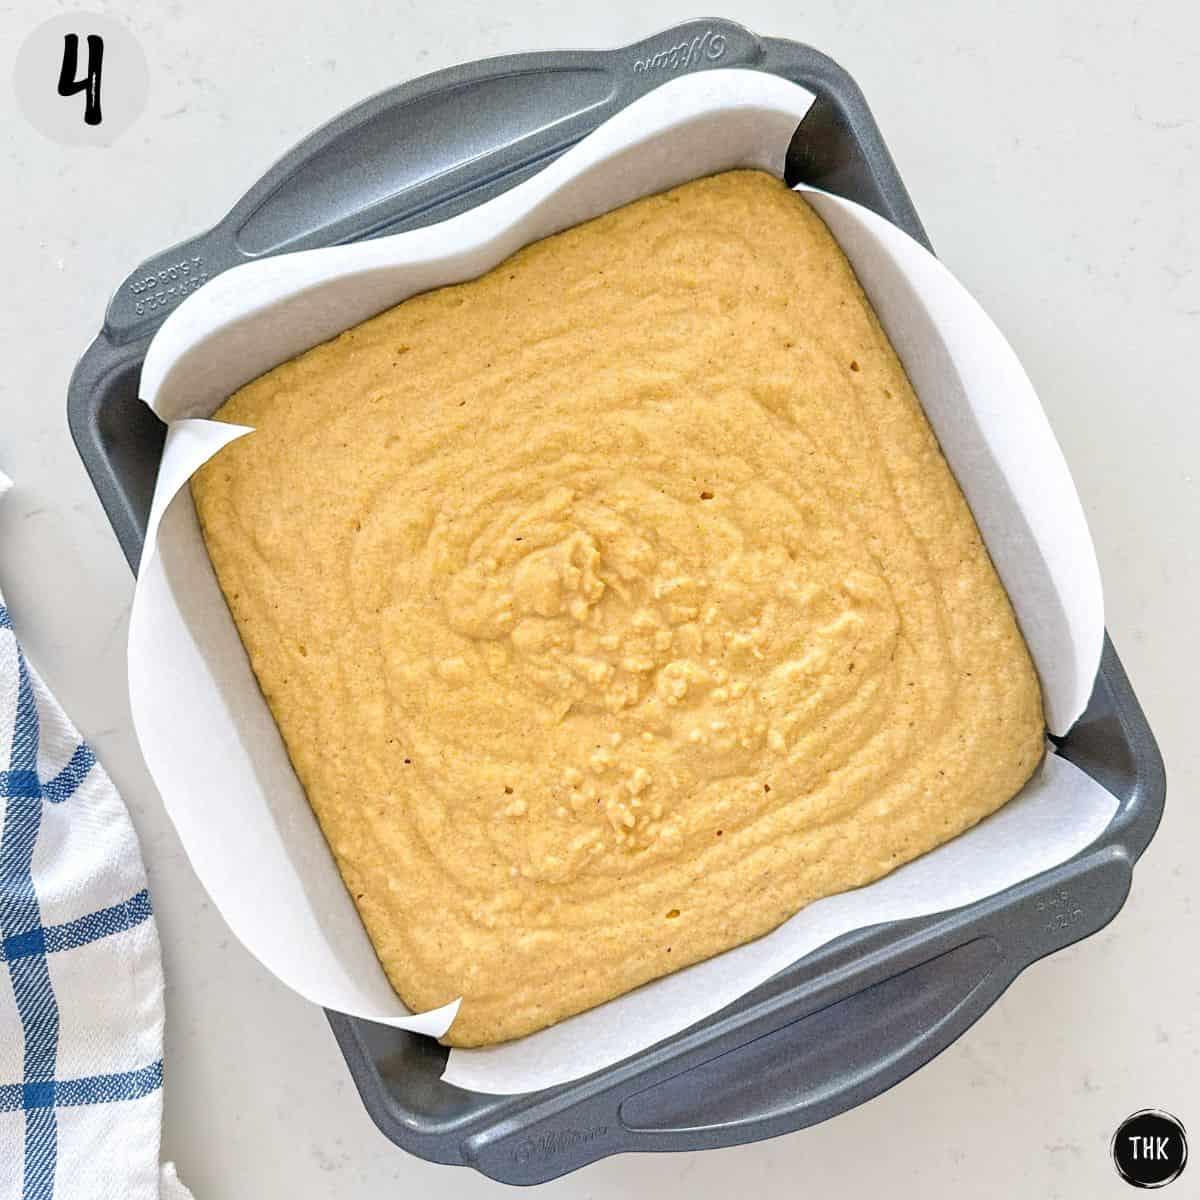 Cornbread batter in square baking pan that's lined with parchment paper.